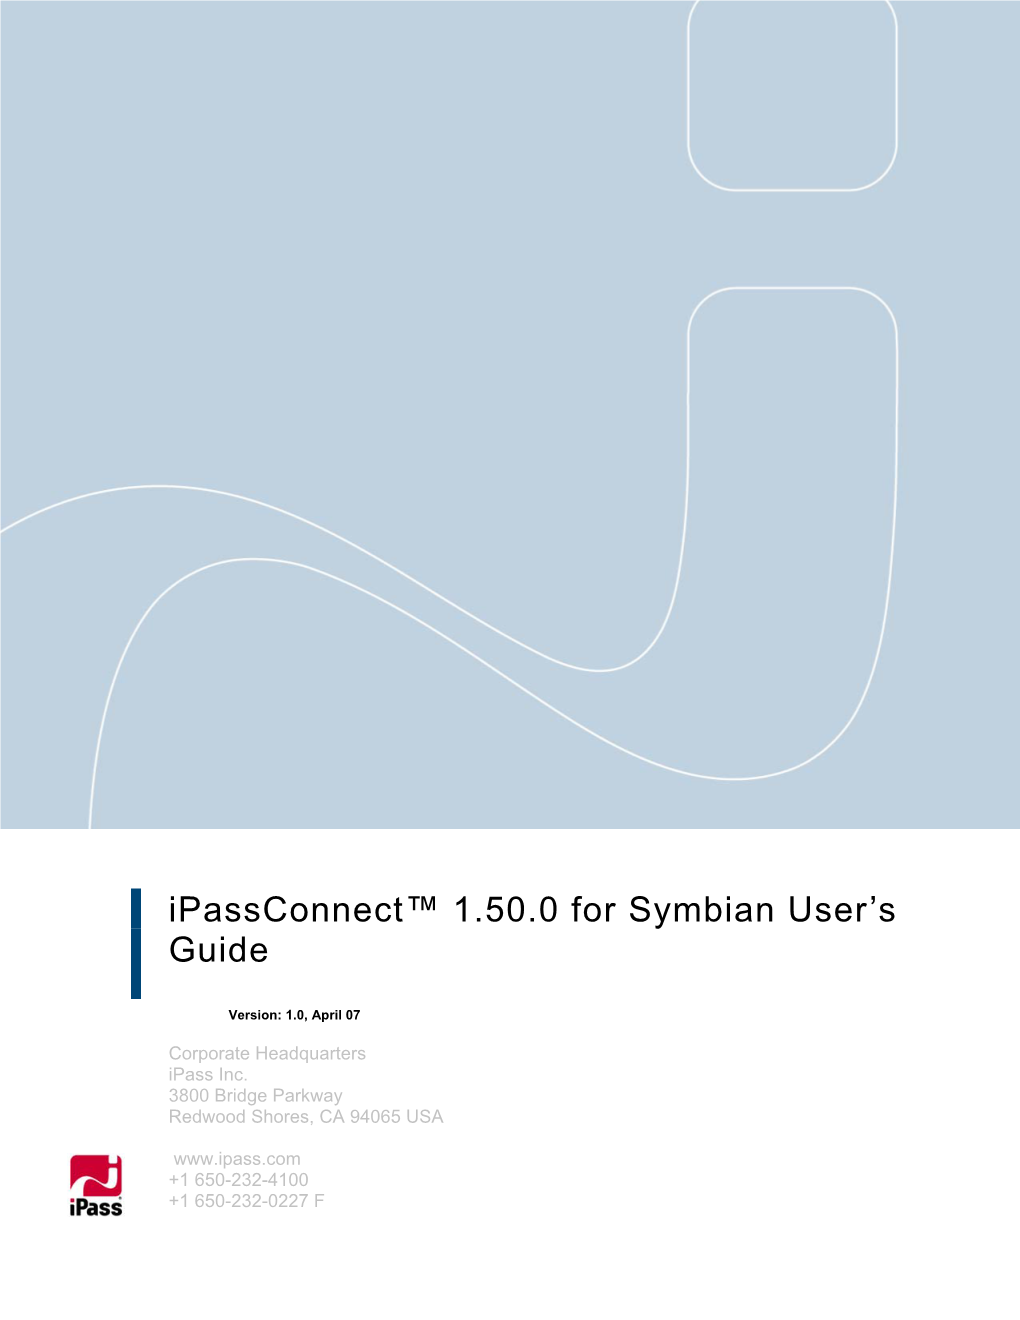 Ipassconnect™ 1.50.0 for Symbian User's Guide